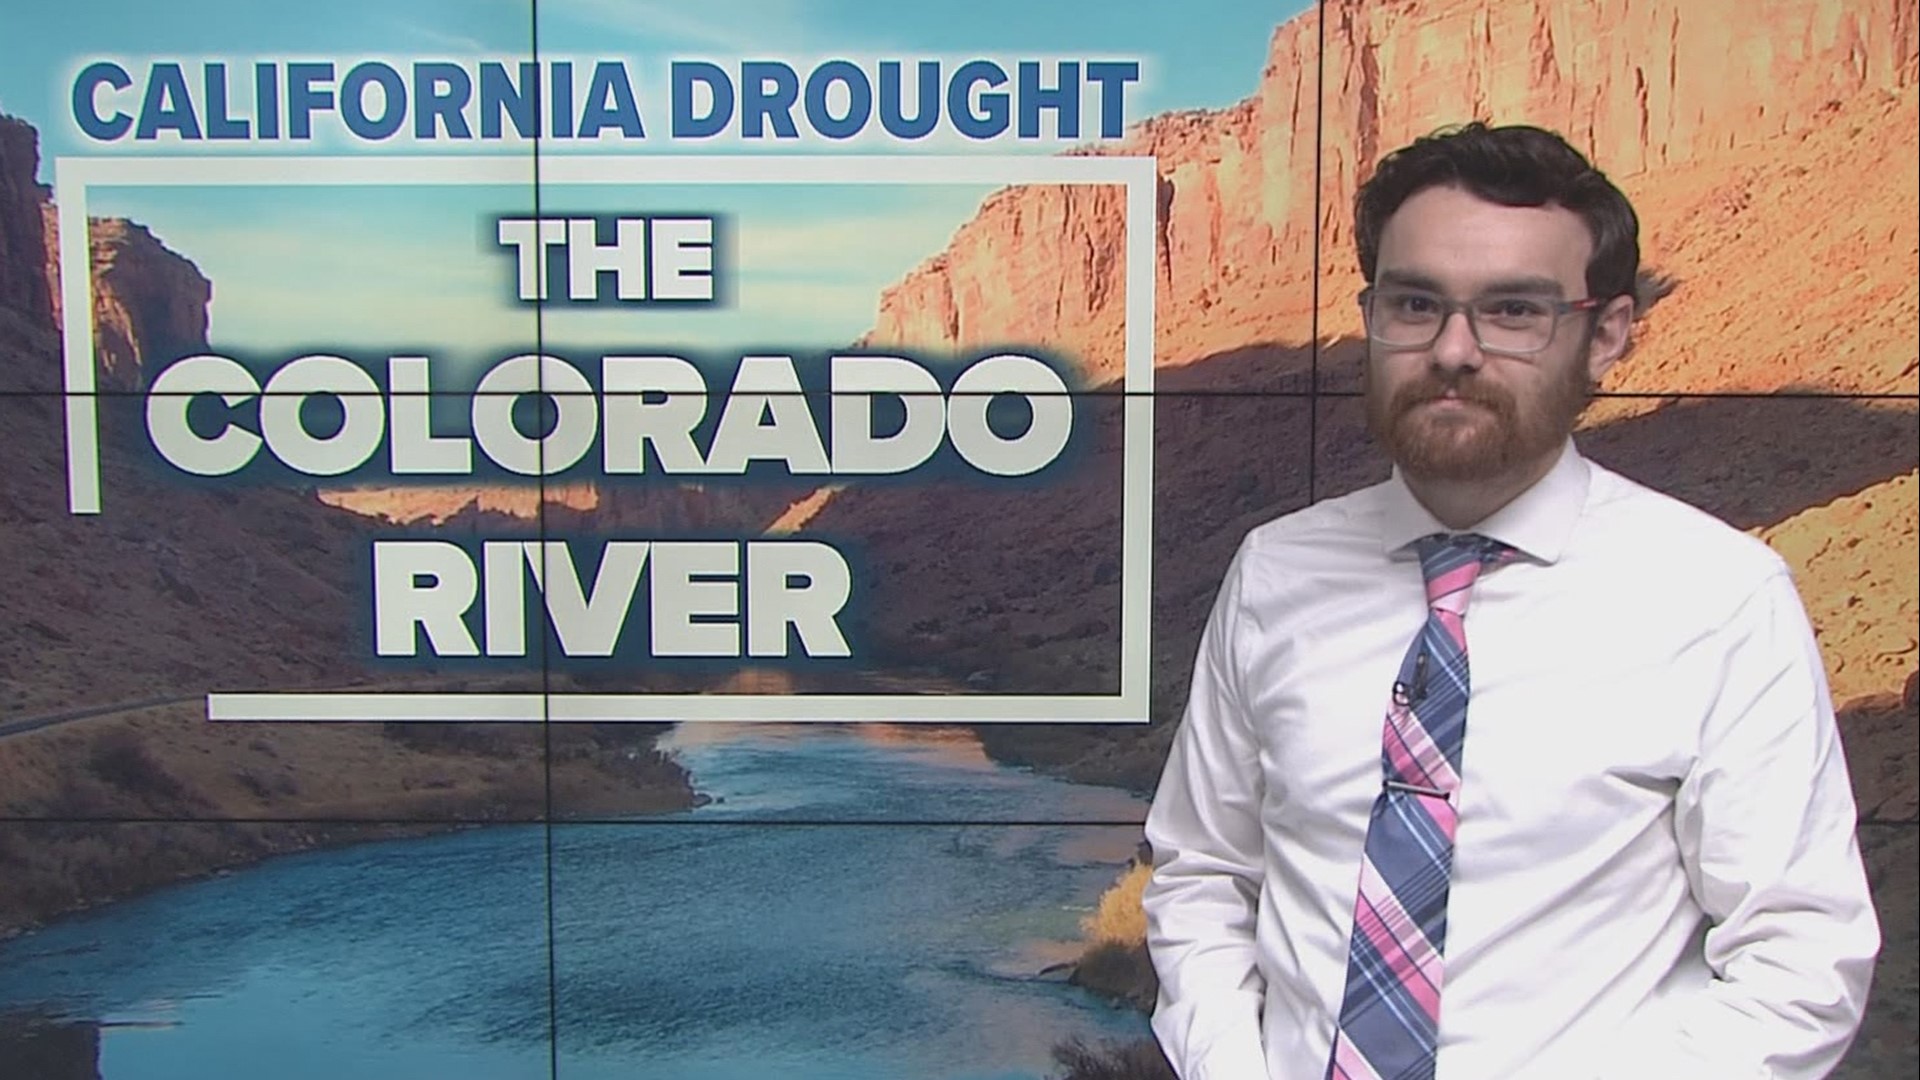 There's a worsening crisis on the over-tapped and overused Colorado River. Brenden Mincheff dives deeper into the river that supplies the lifeblood for many states.